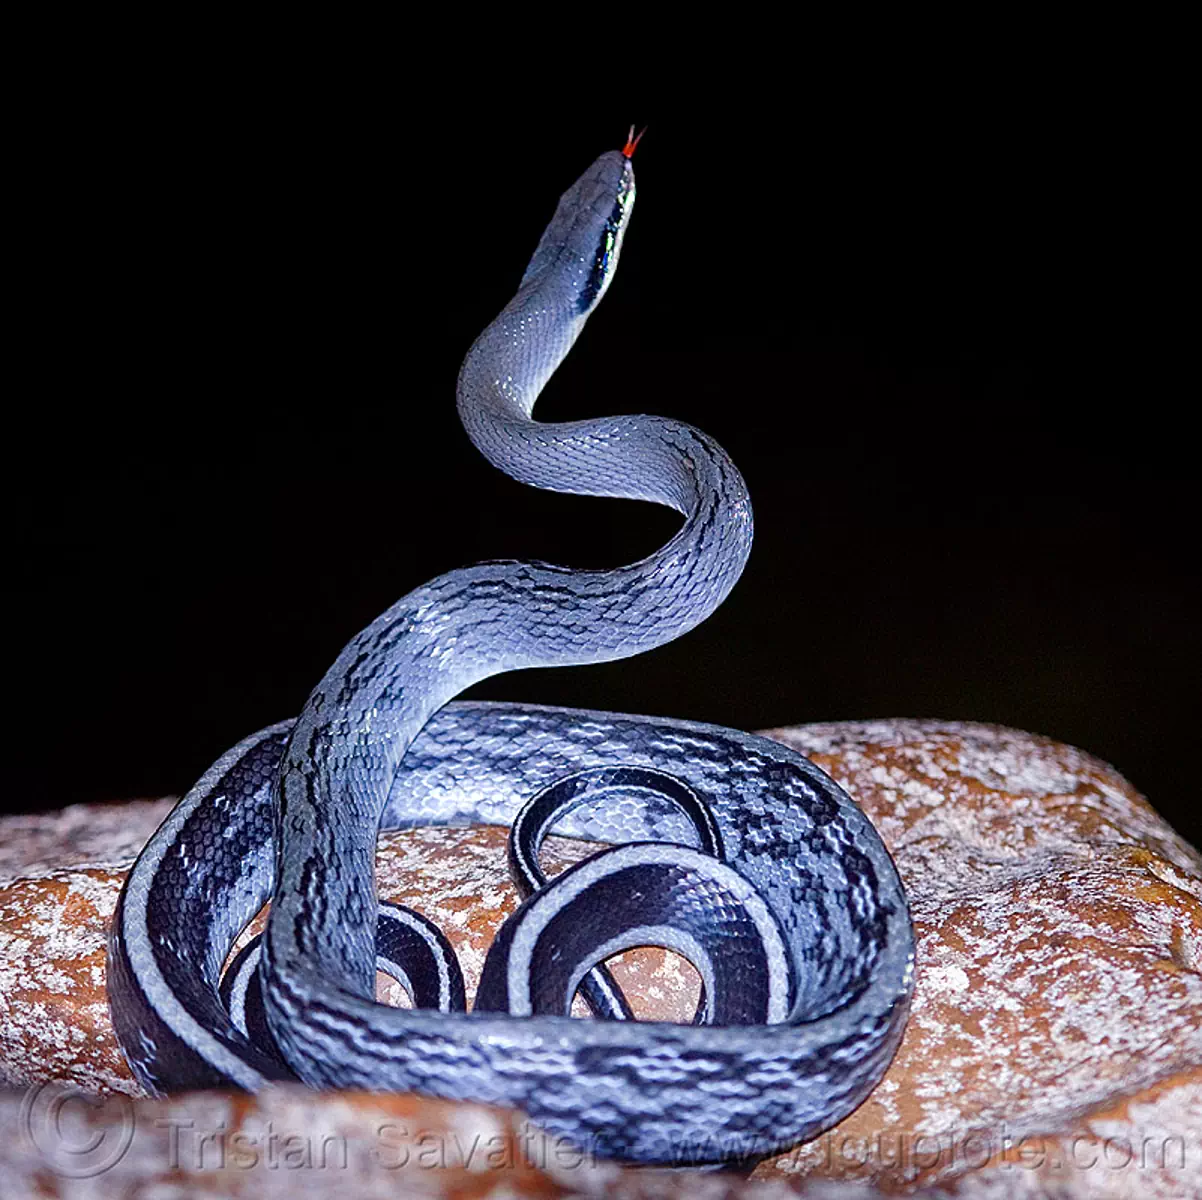 cave racer snake - beauty rat snake - elaphe taeniura grabowskyi (borneo), beauty rat snake, borneo, cave-dwelling, caving, clearwater cave system, clearwater connection, coiled, elaphe taeniura grabowskyi, gunung mulu national park, malaysia, natural cave, orthriophis taeniurus, racer snake, spelunking, wildlife